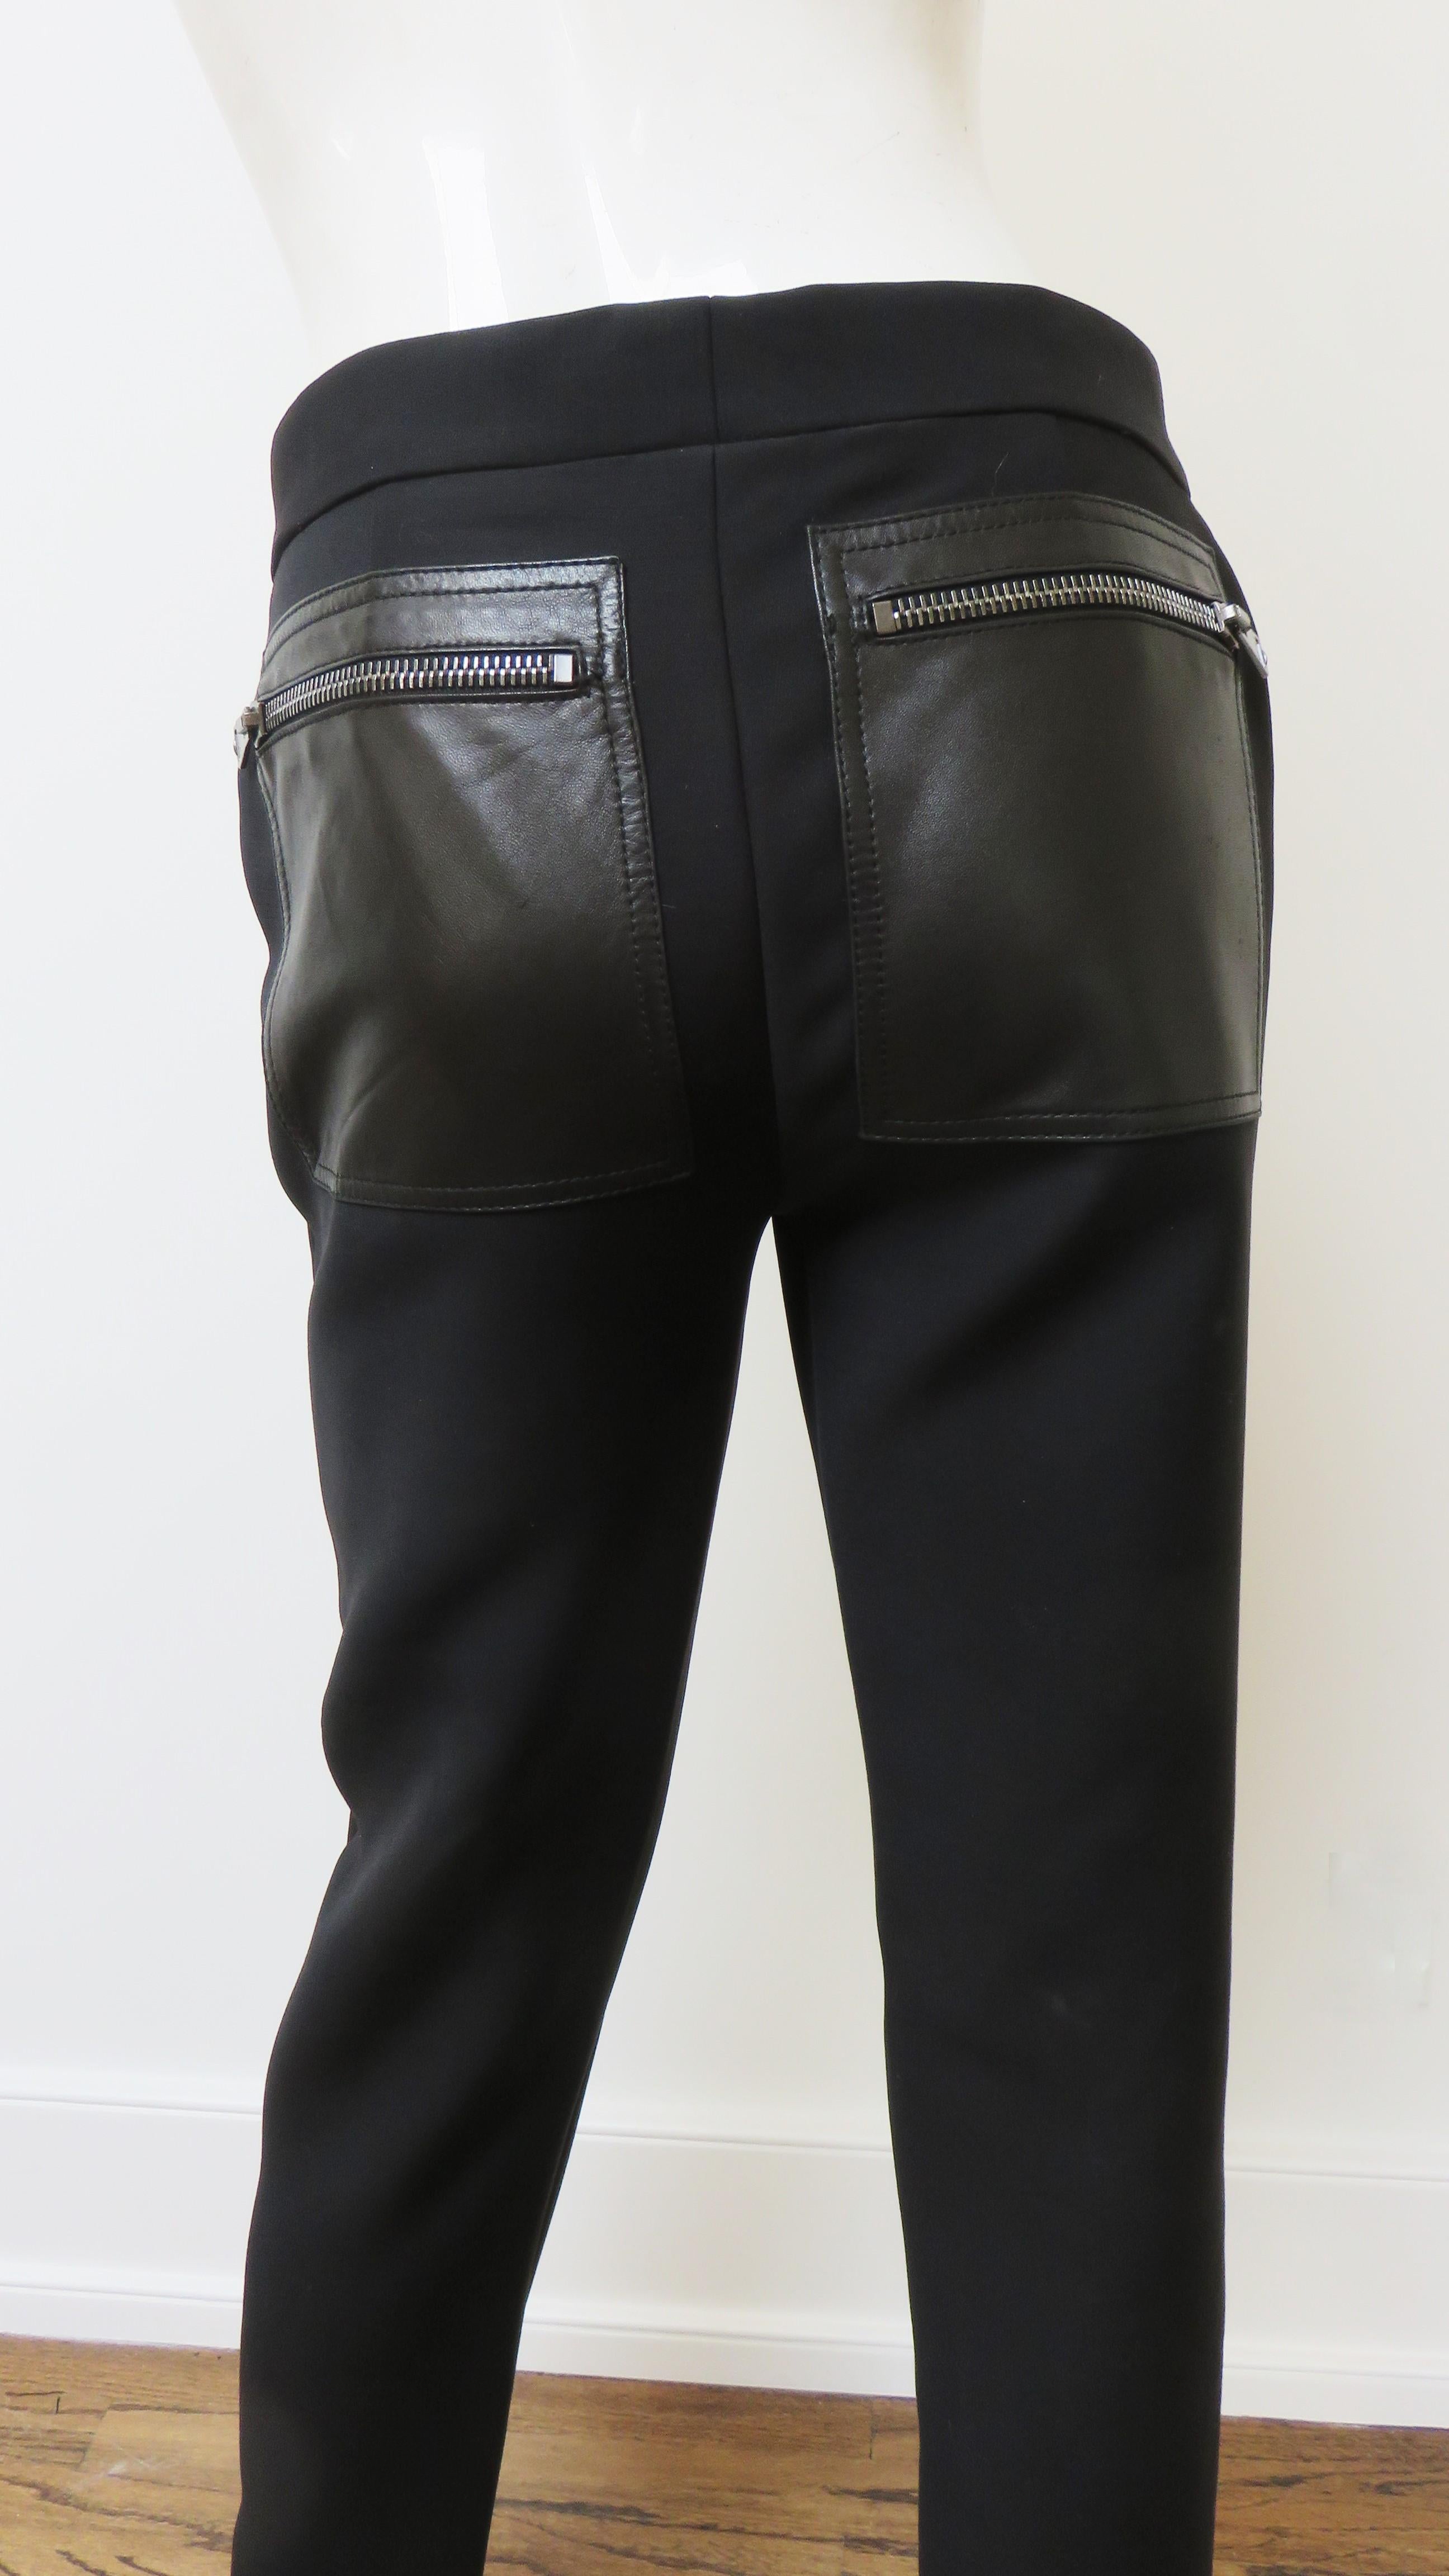 Tom Ford for Gucci Pants with Zipper Legs A/W 2001 For Sale 6